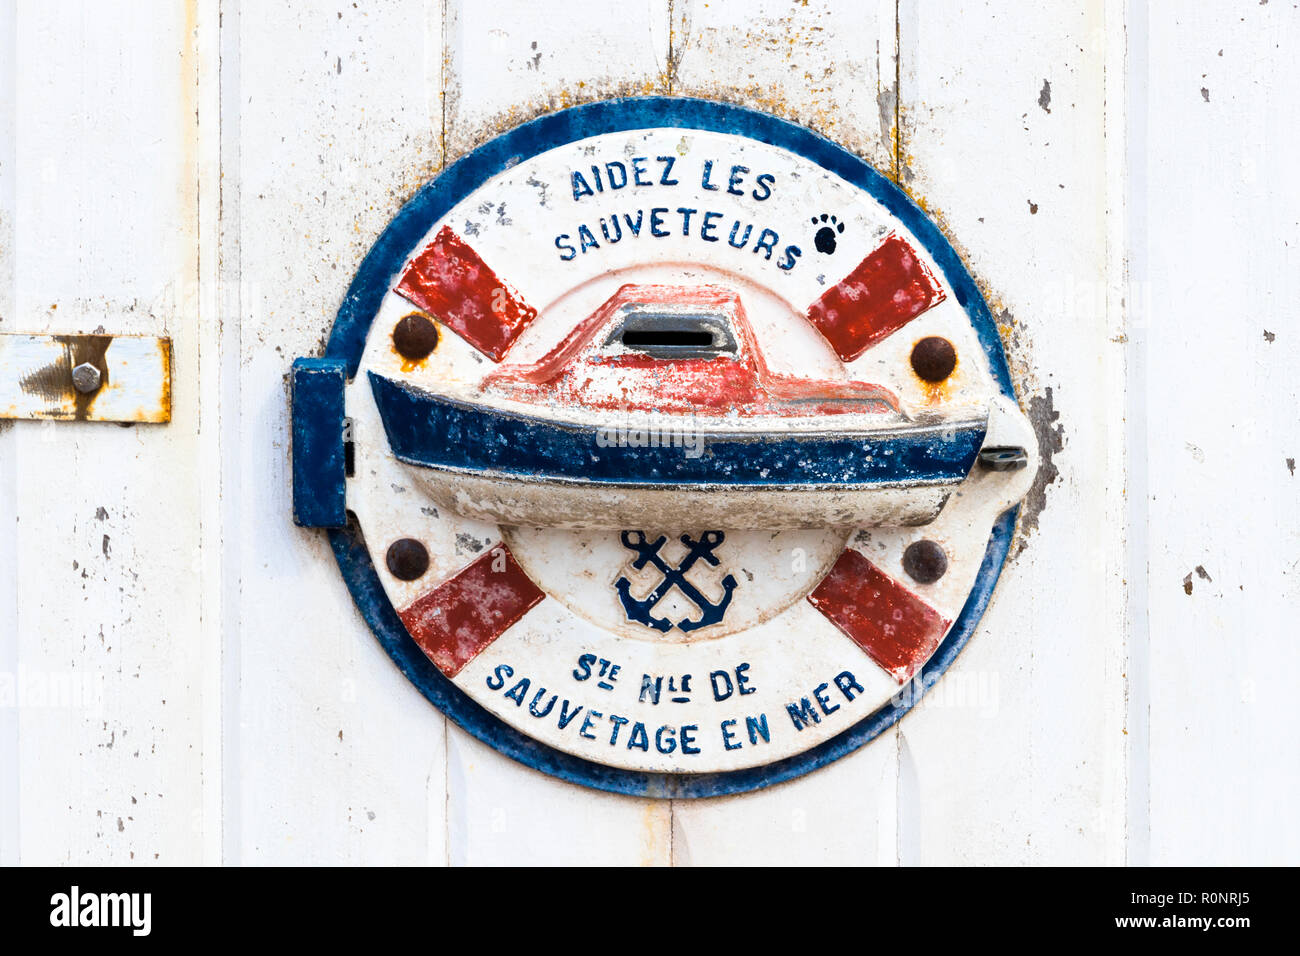 An Aidez les Sauveteurs (help the lifeguards) sign at a wooden door, from the SNSM, a French voluntary organisation that saves lives at sea around the Stock Photo